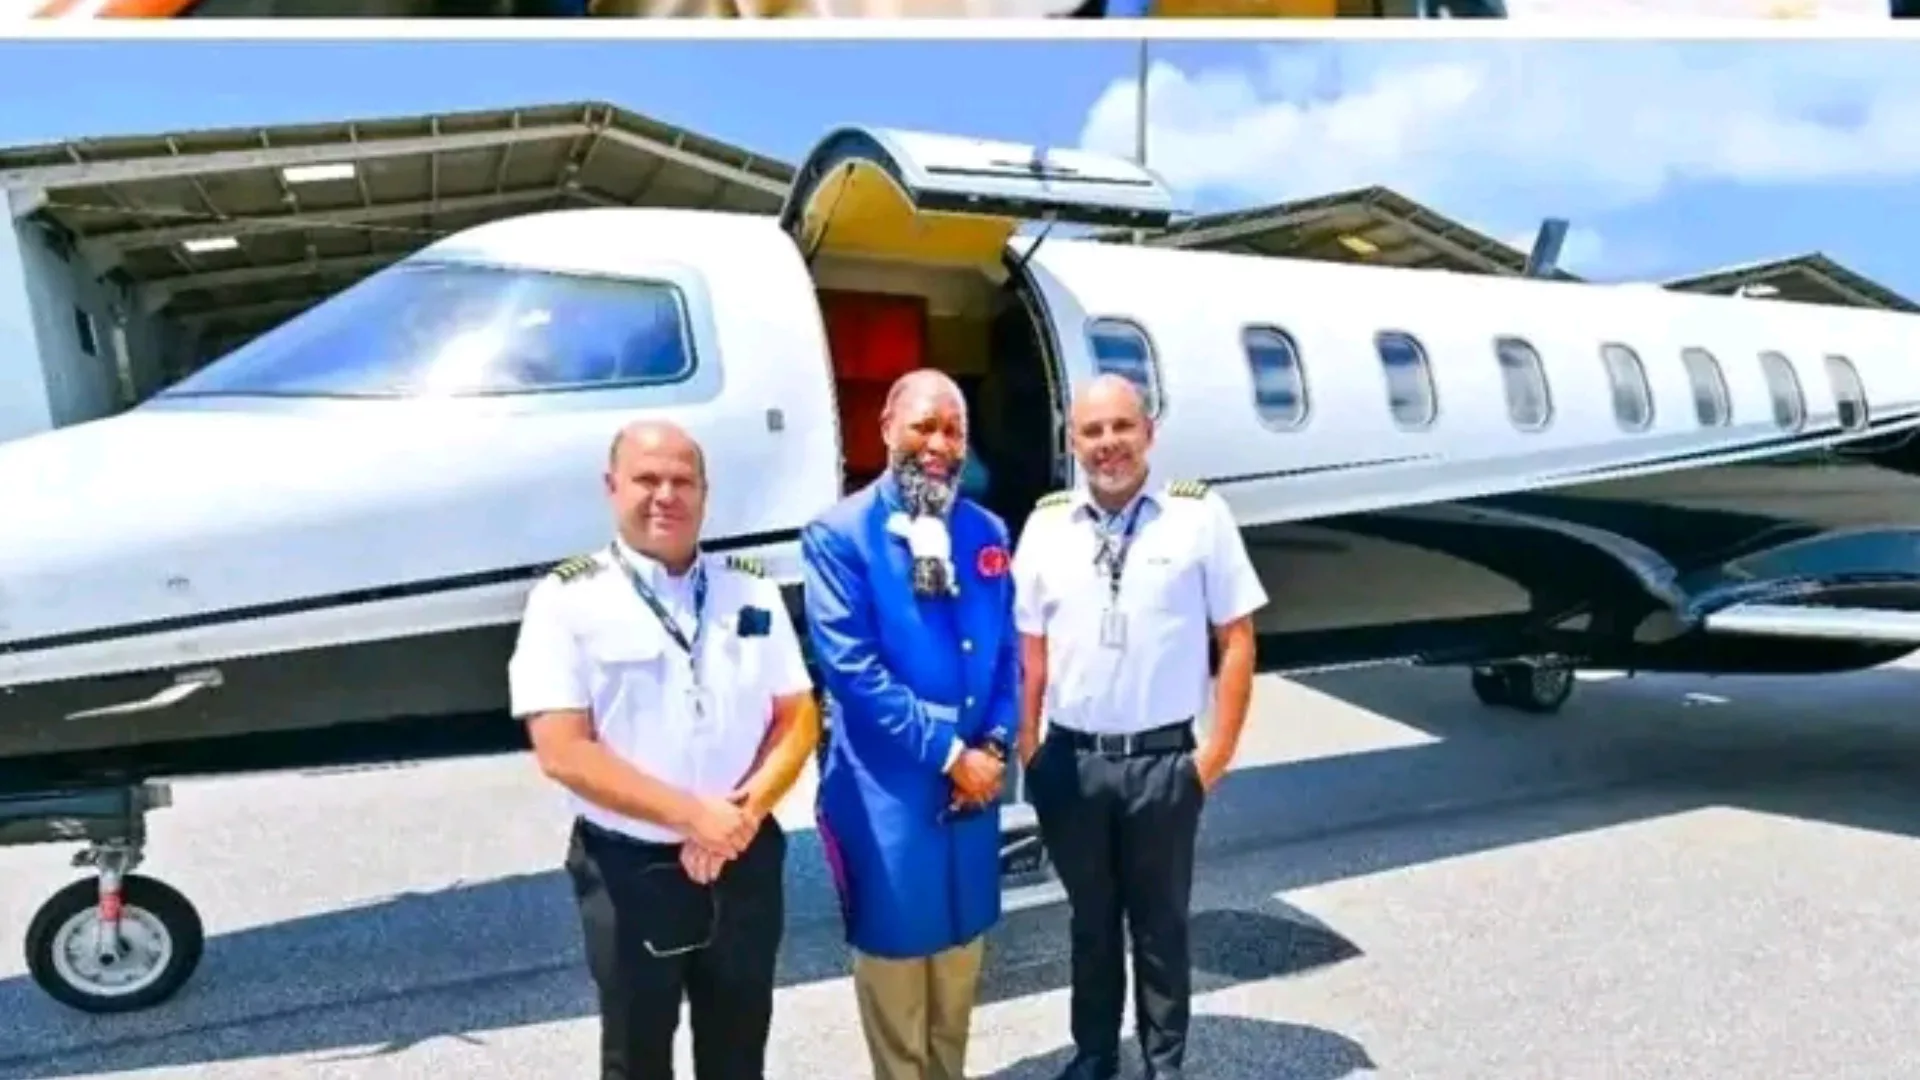 On Saturday 10, revered preacher Prophet Dr. David Owuor was gifted a private jet in Brazil after a Gospel missions in which he delivered electrifying sermons